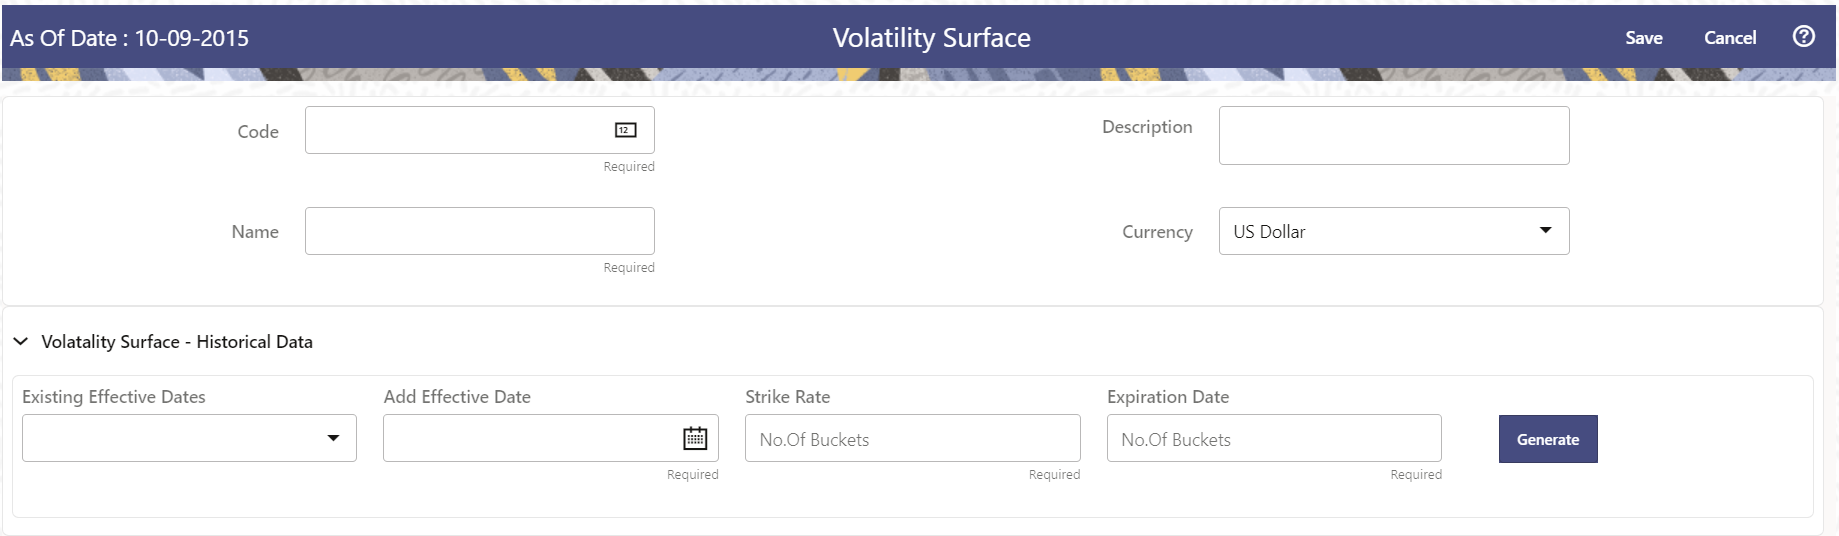 Volatility Surface Rule